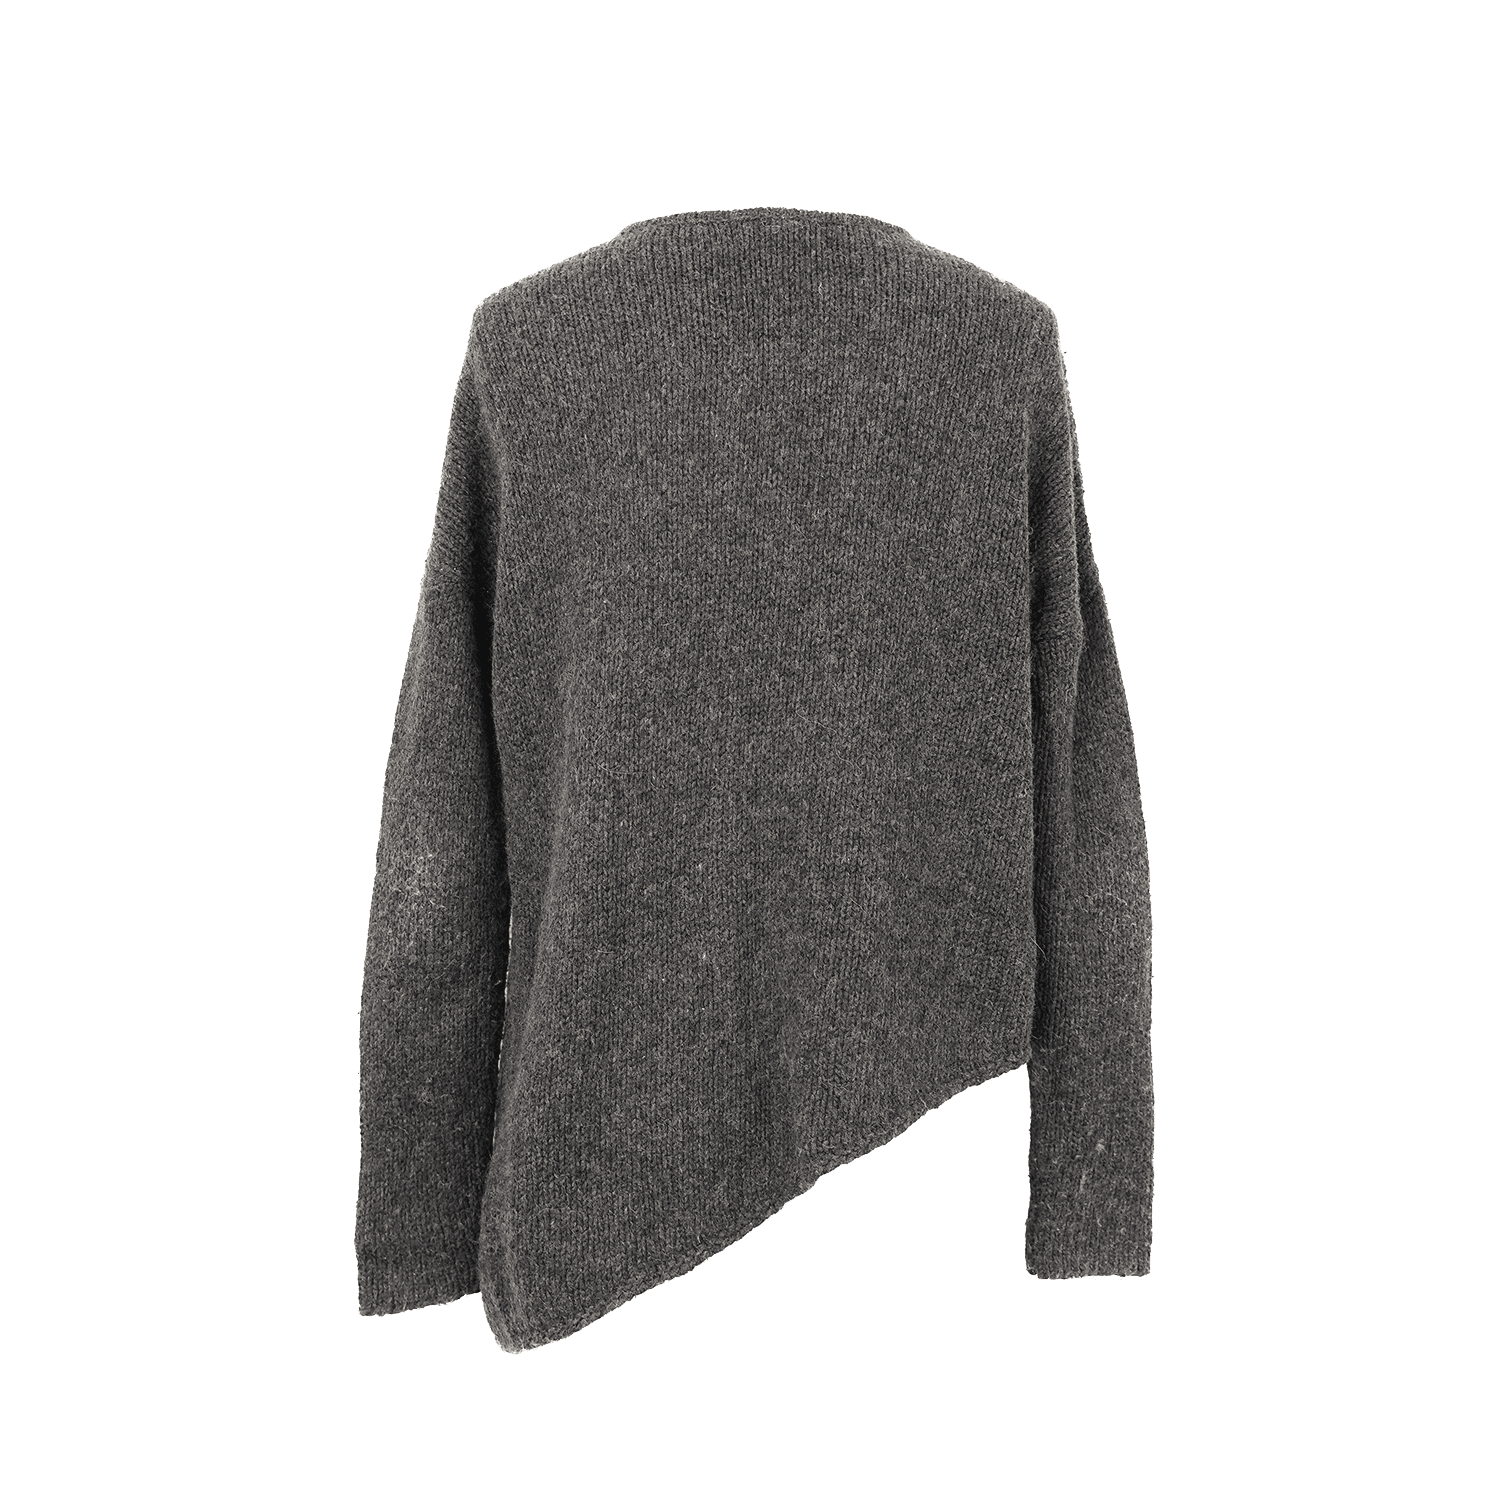 Helmut Lang Sweater - Fashionably Yours